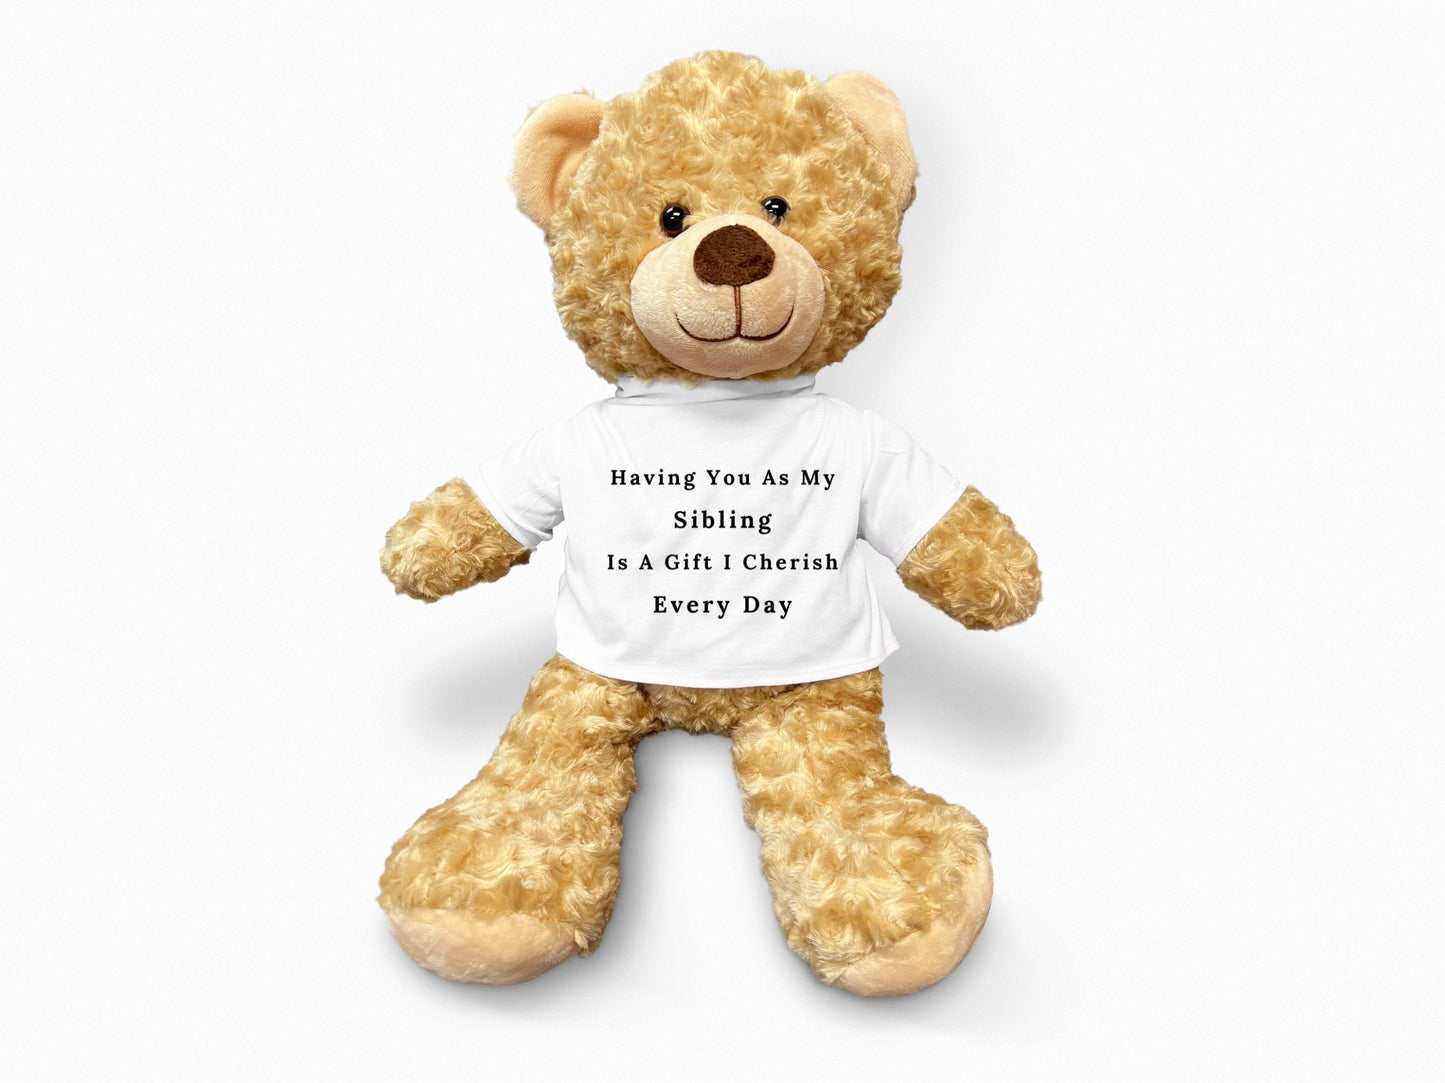 Sibling Teddy Bear for a Unique Gift, Plush Brother Teddy Bear, Sister Teddy Bear, Sibling Gifts, Teddy Bear for Sibling